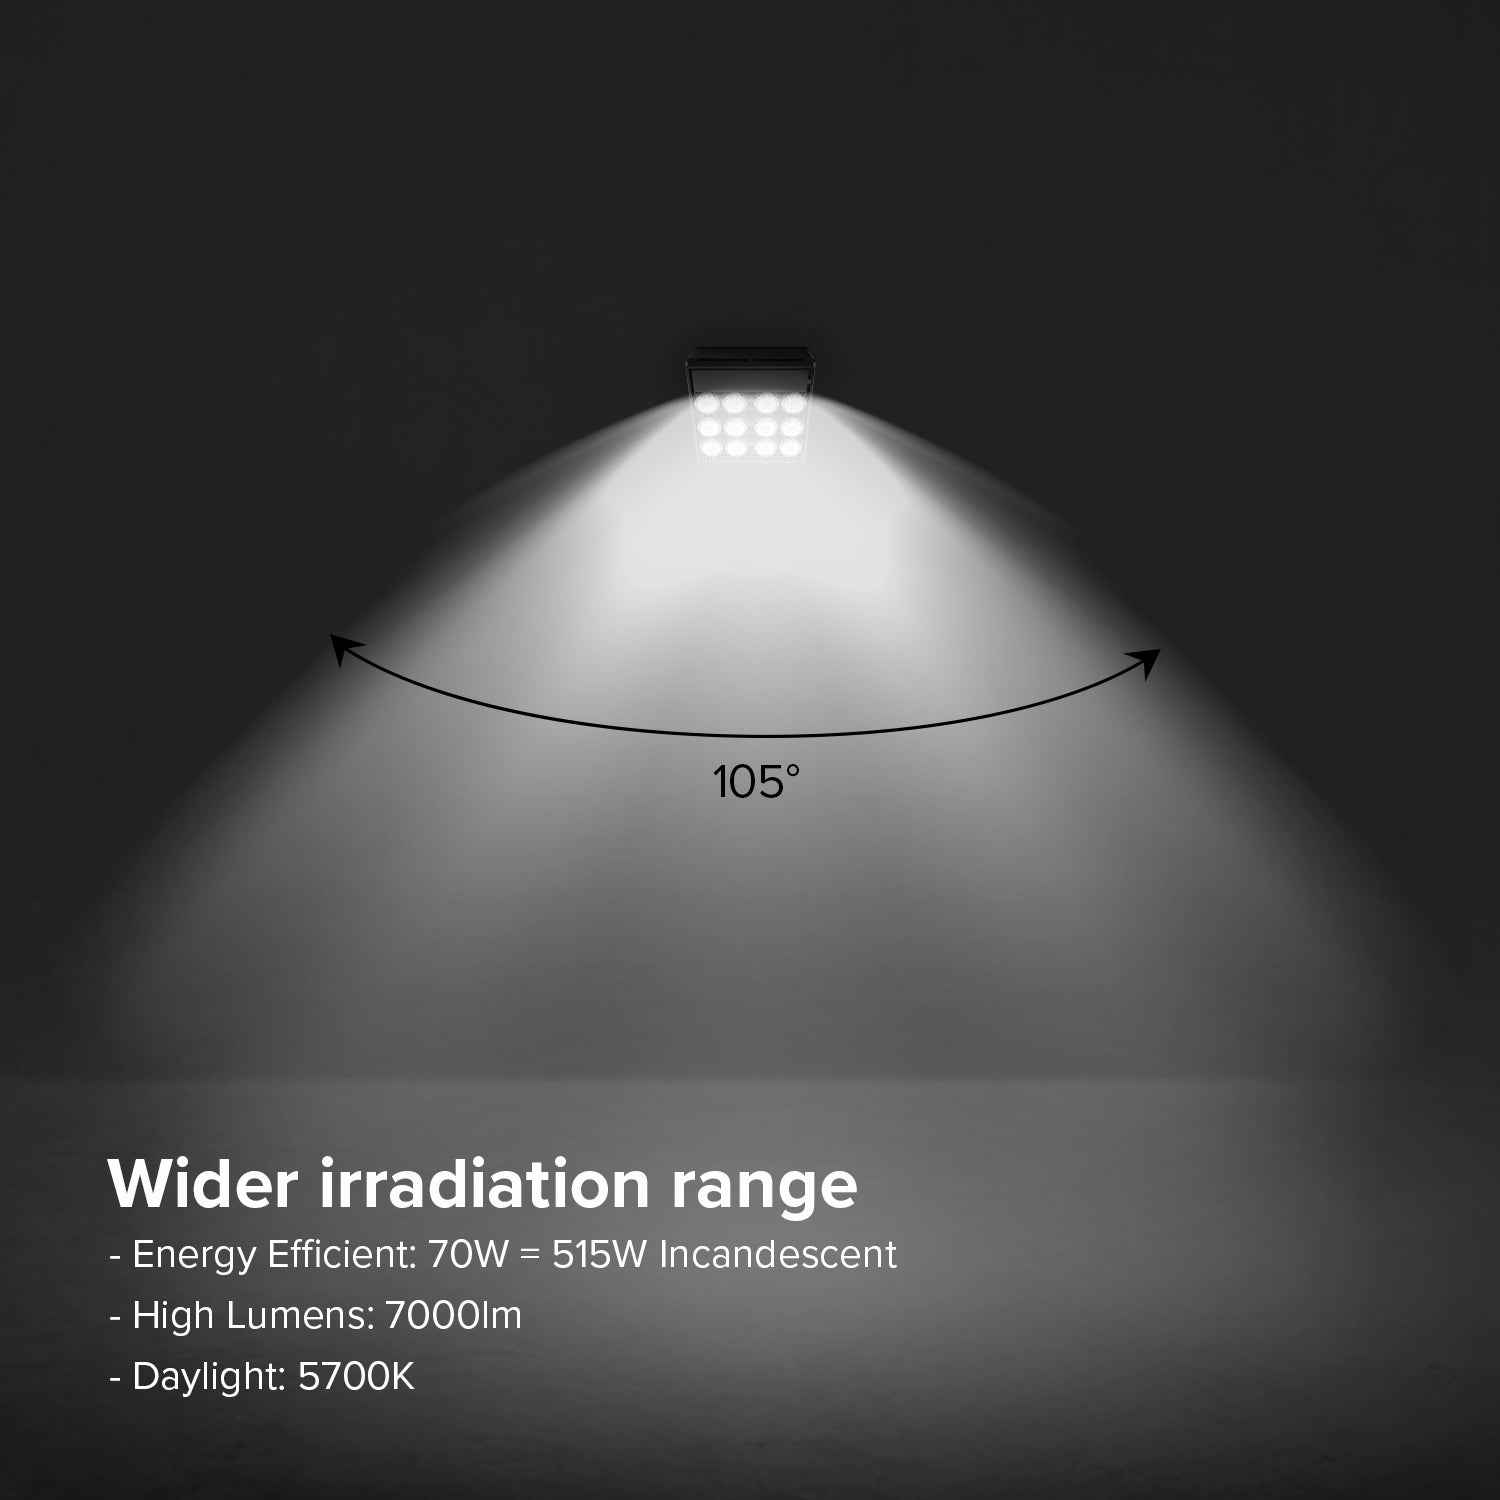 70W LED Wall Pack Light (US ONLY) has wider irradiation range.